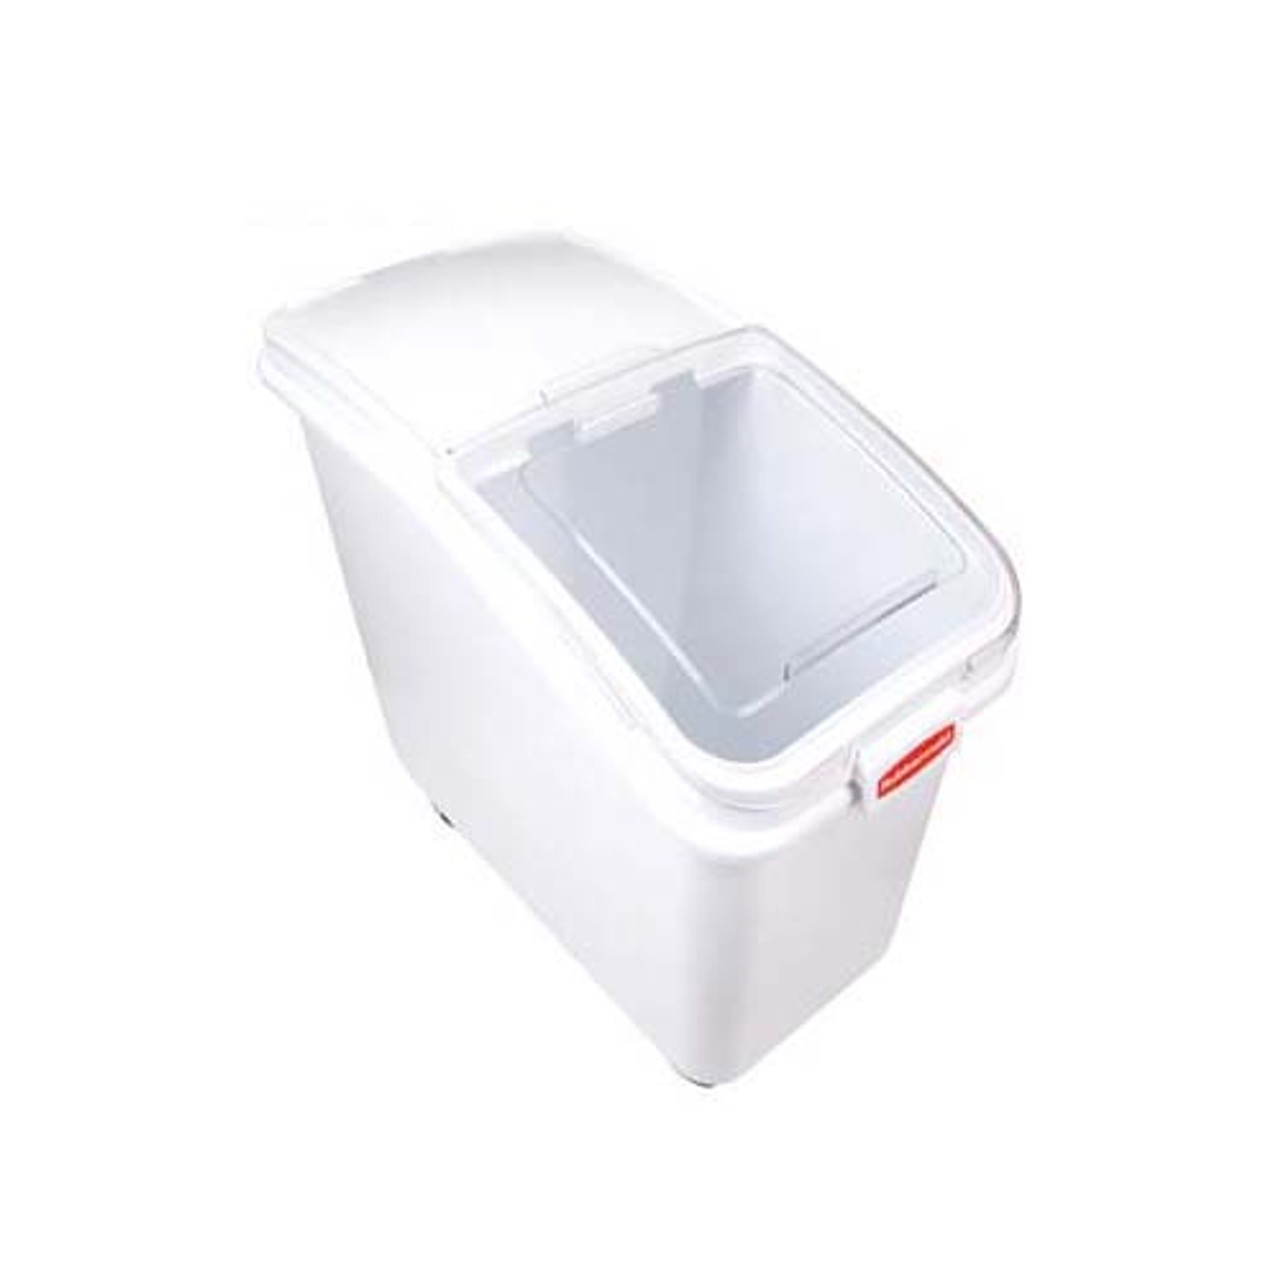 Ingredient Bin 26 Rubber White - Replacement Part For Rubbermaid RBMD3602-88